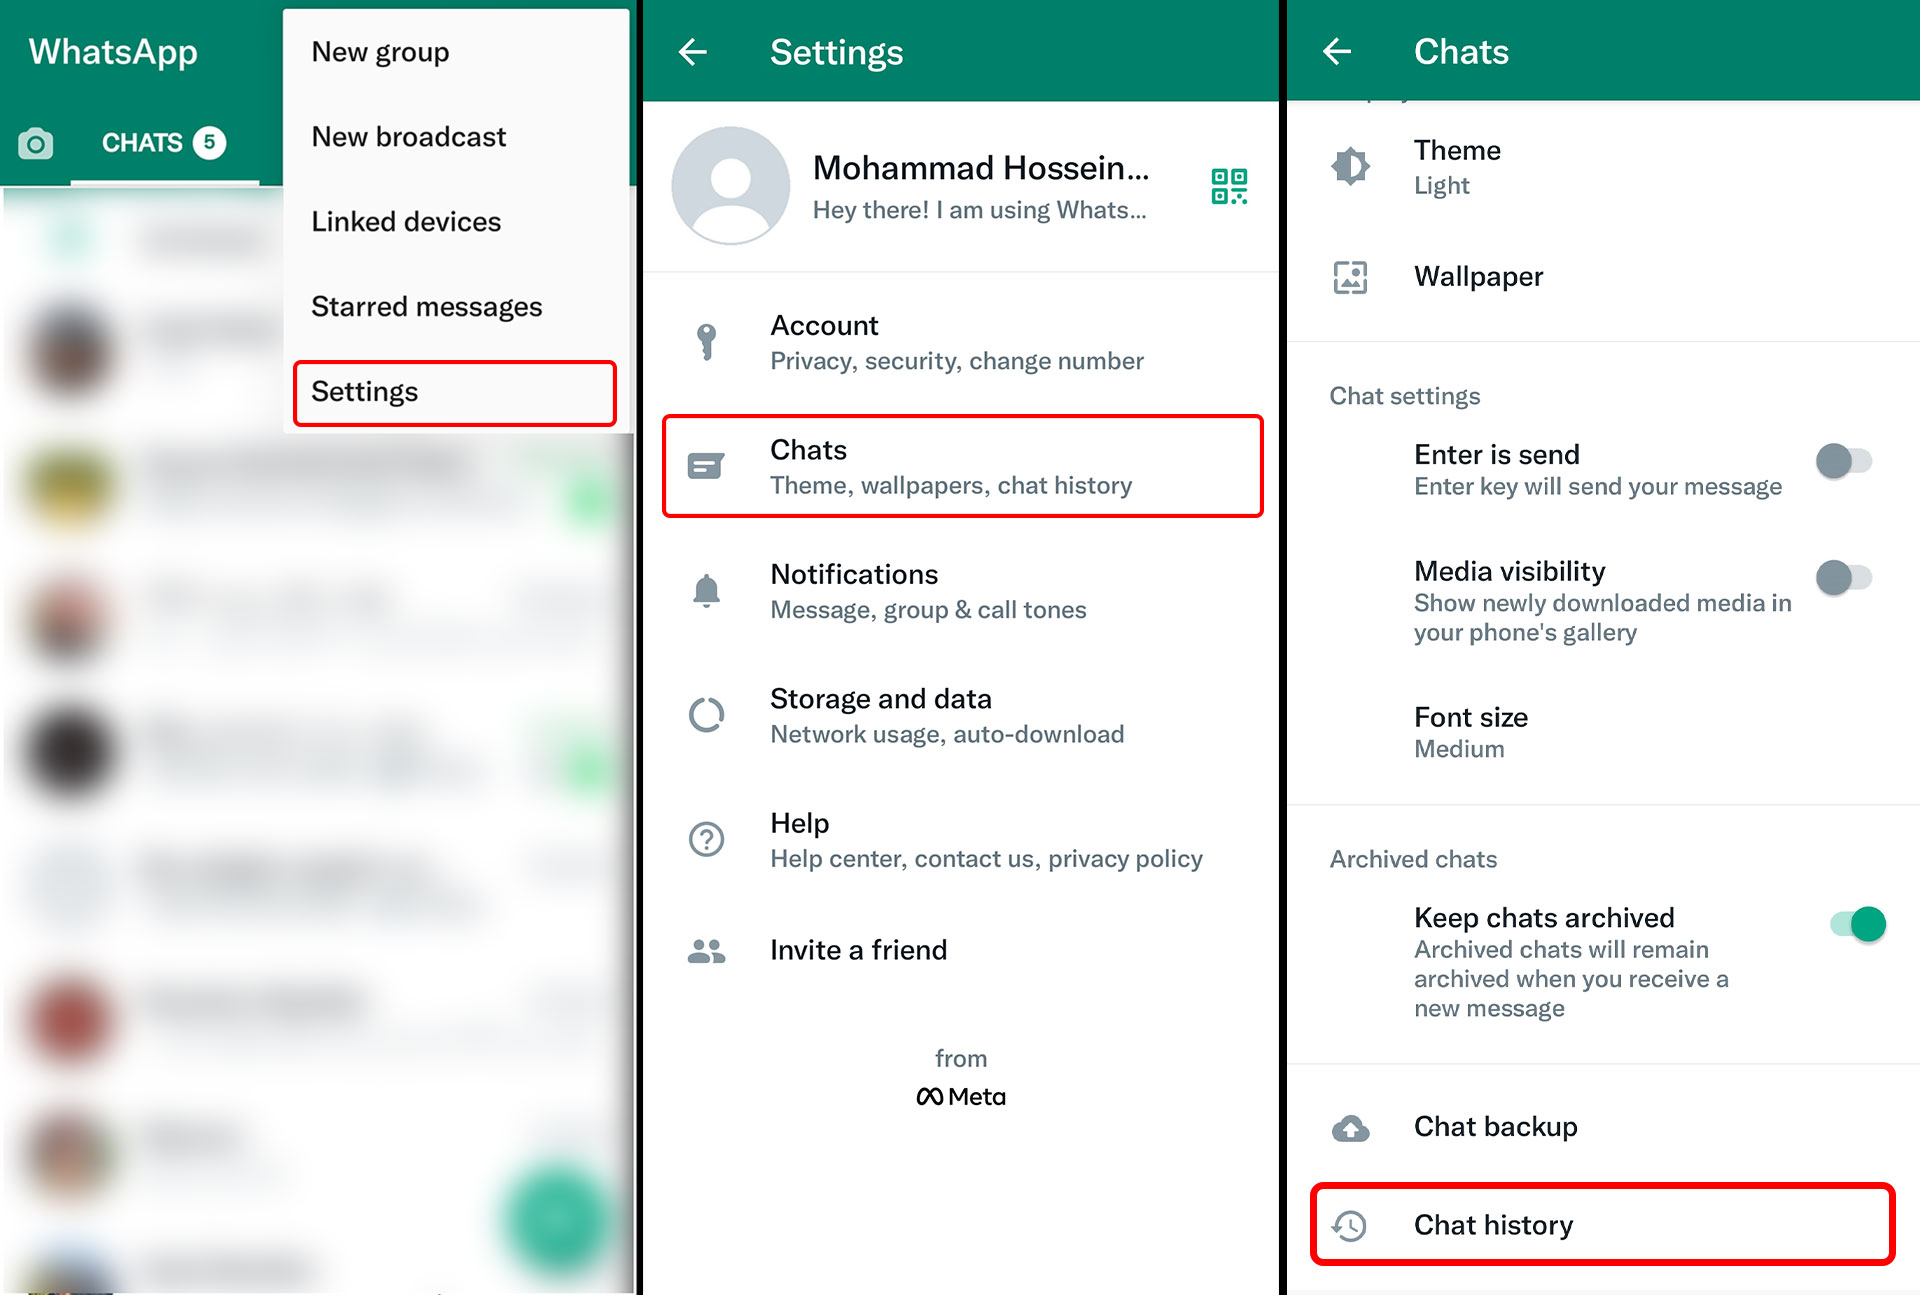 Manage storage space in WhatsApp